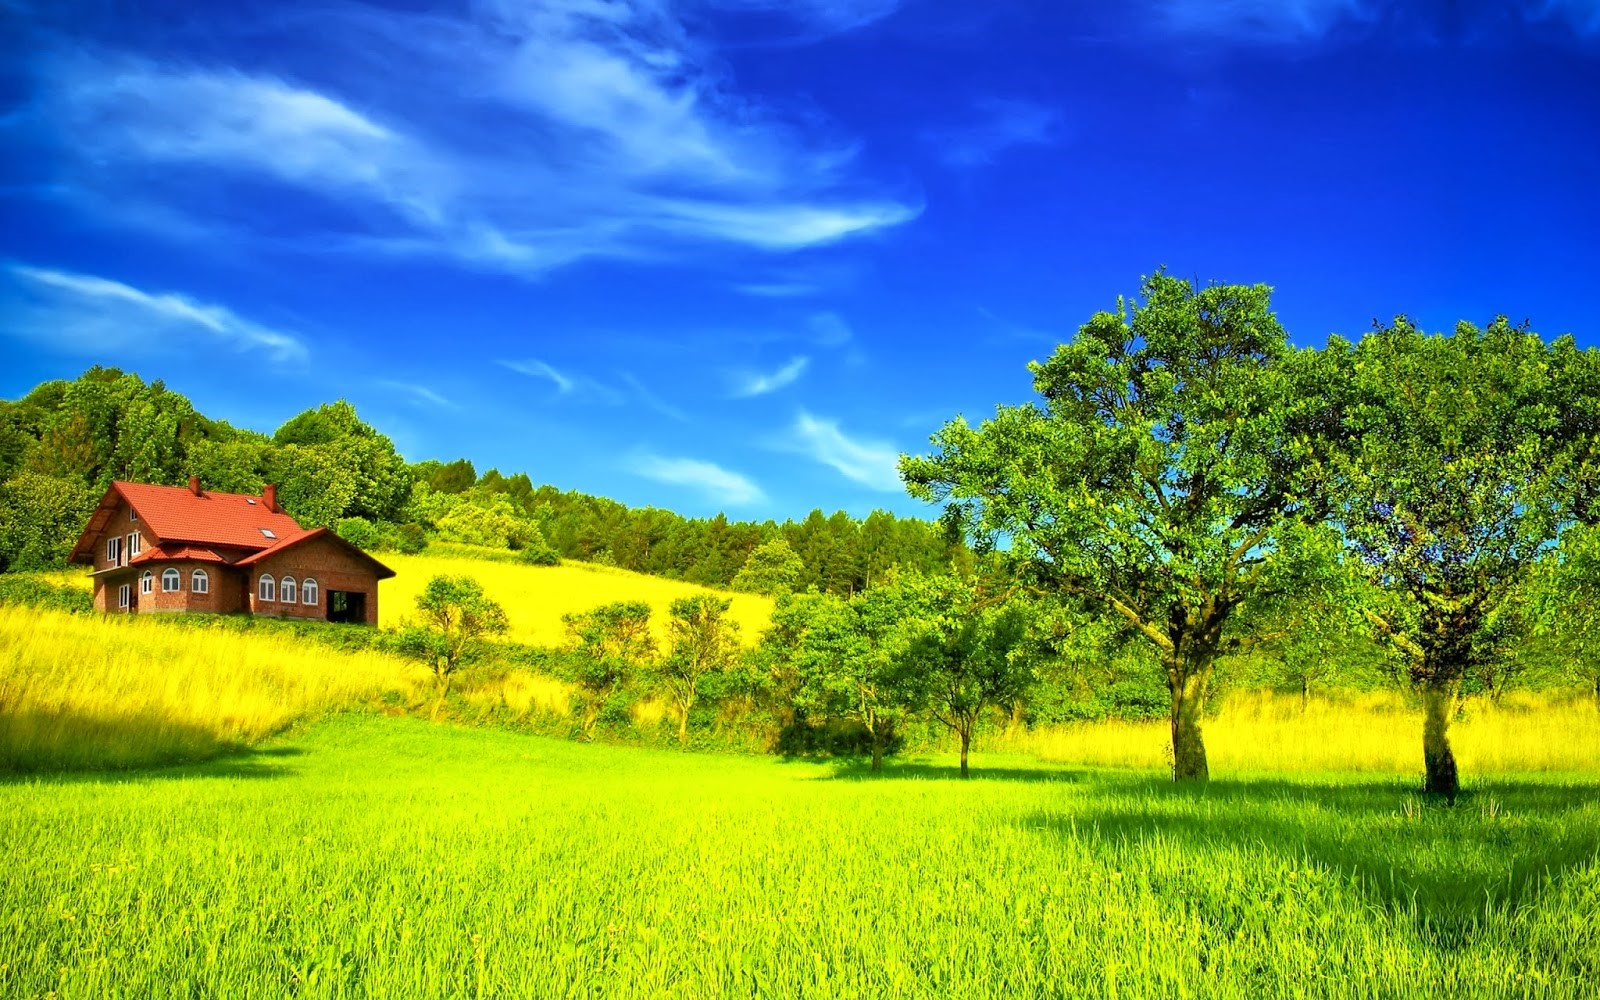 most beautiful green nature wallpapers in the world | HD ...